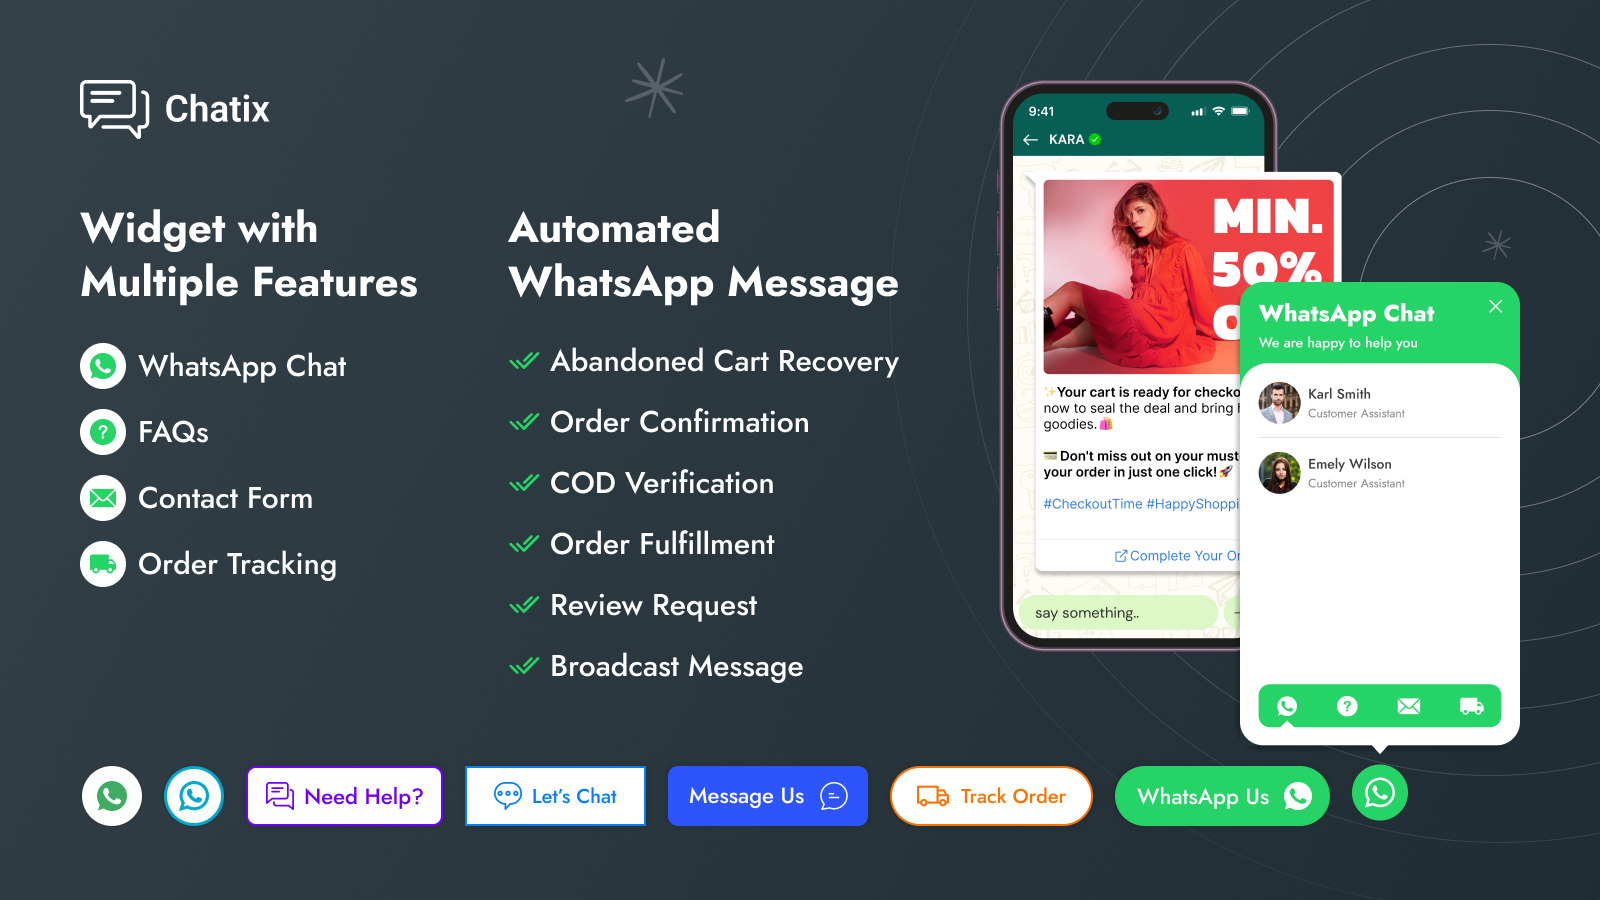 whatsapp chat and cart recovery